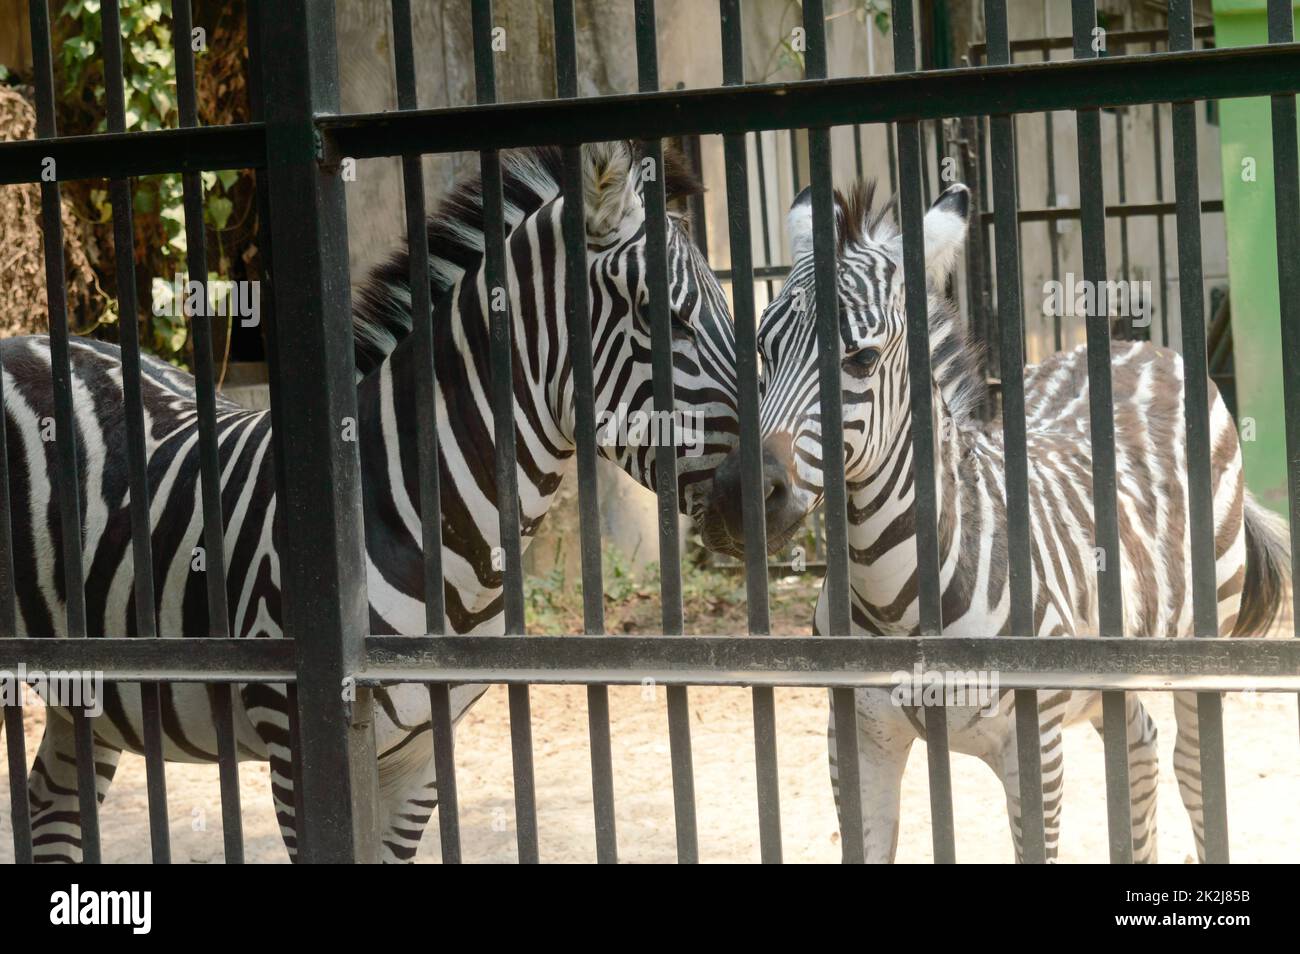 Animals in captivity. White stripes zebra inside the cage in Alipur Zoological Garden, Kolkata, West Bengal, India South Asia. Stock Photo